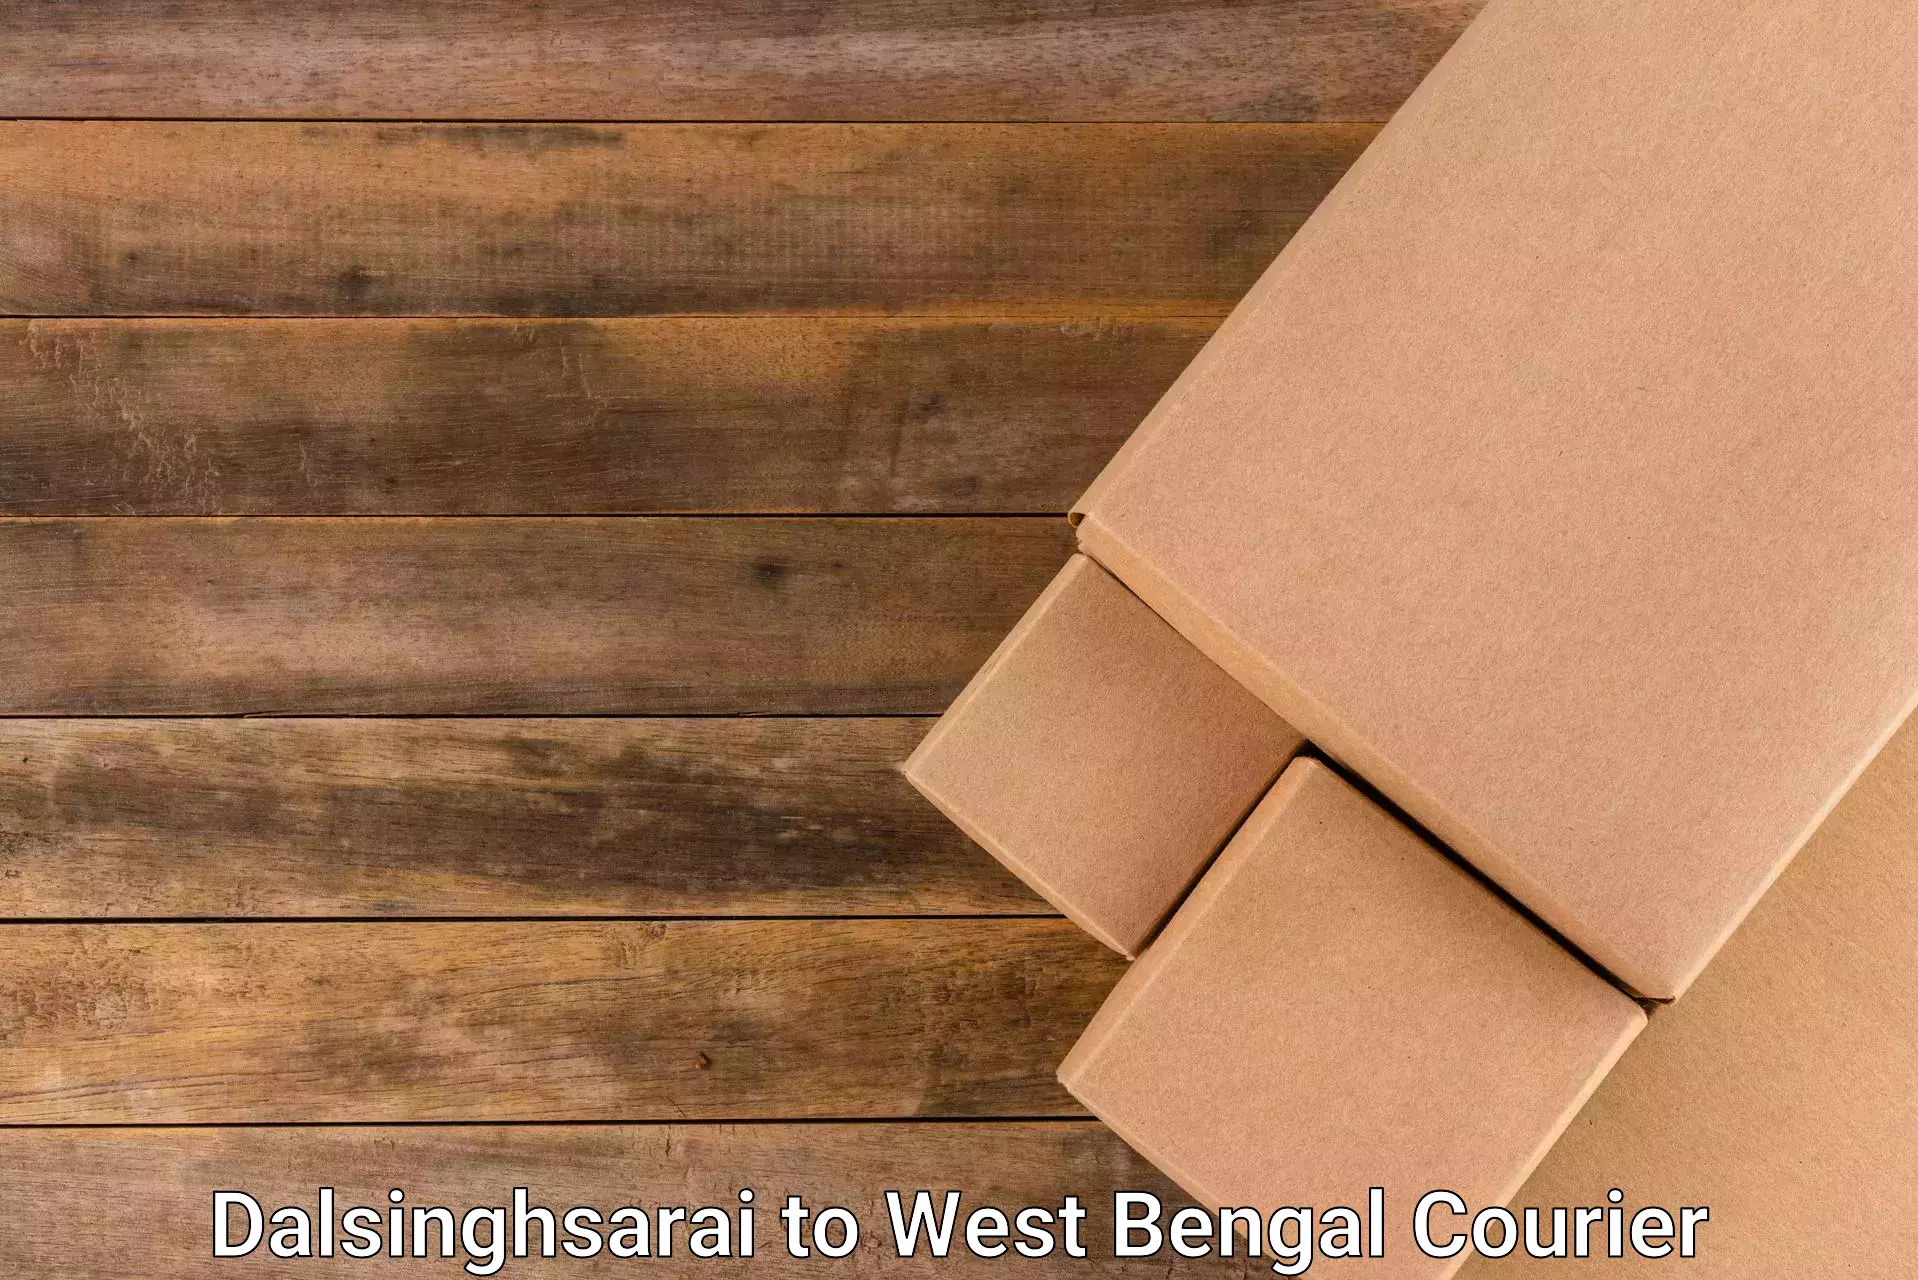 Express shipping Dalsinghsarai to West Bengal